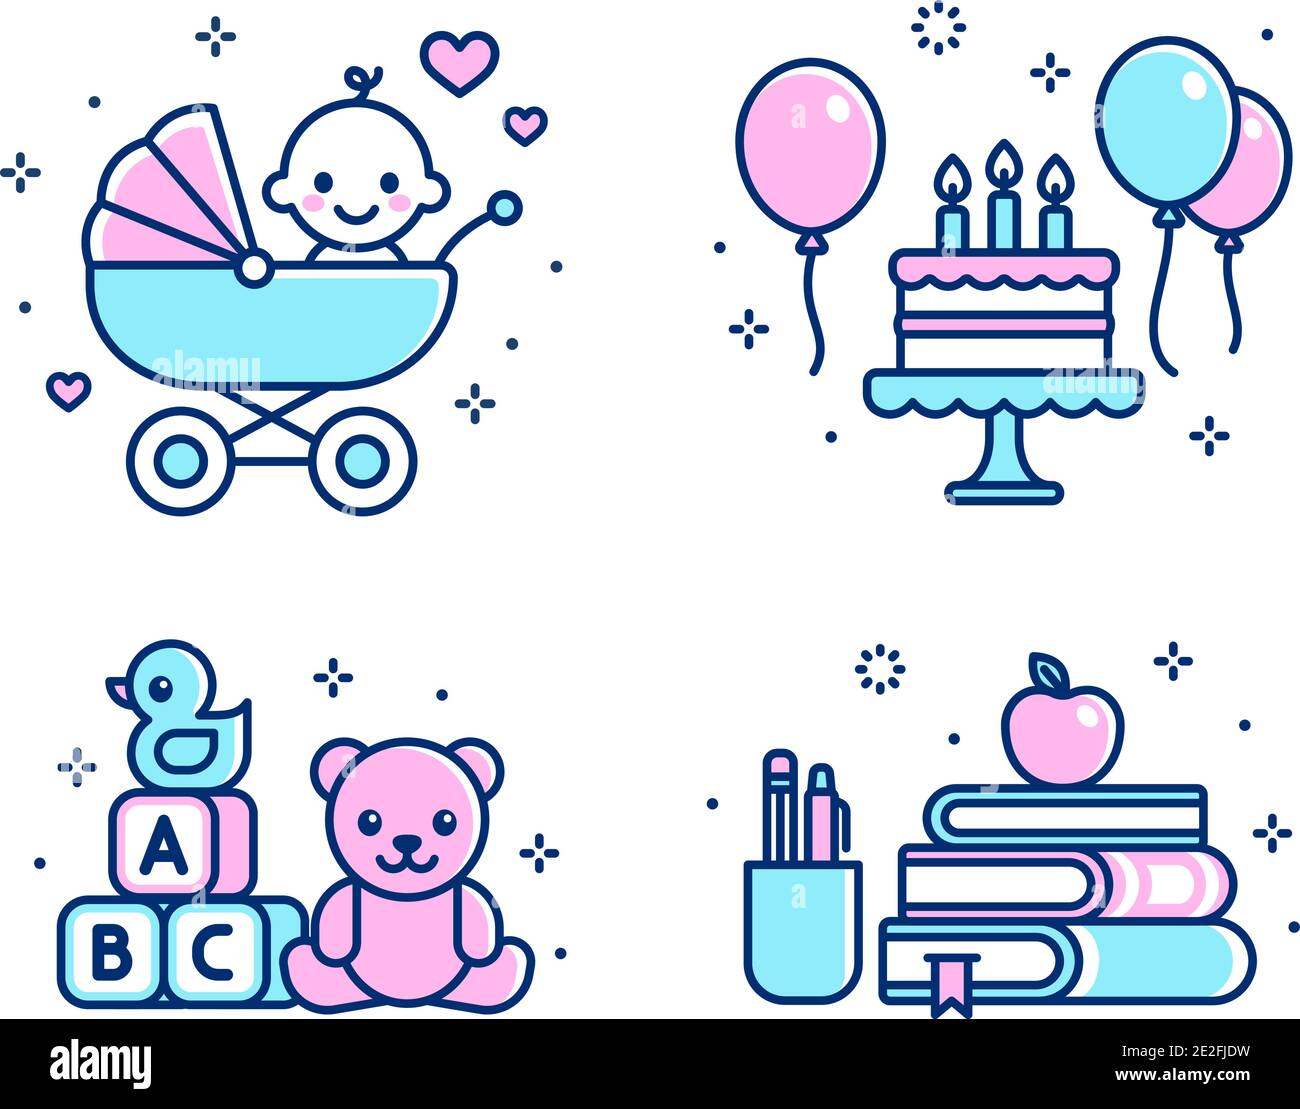 Childhood icon set. Baby in stroller, birthday cake, toys, school supplies. Simple cartoon line icons, isolated vector illustration. Stock Vector